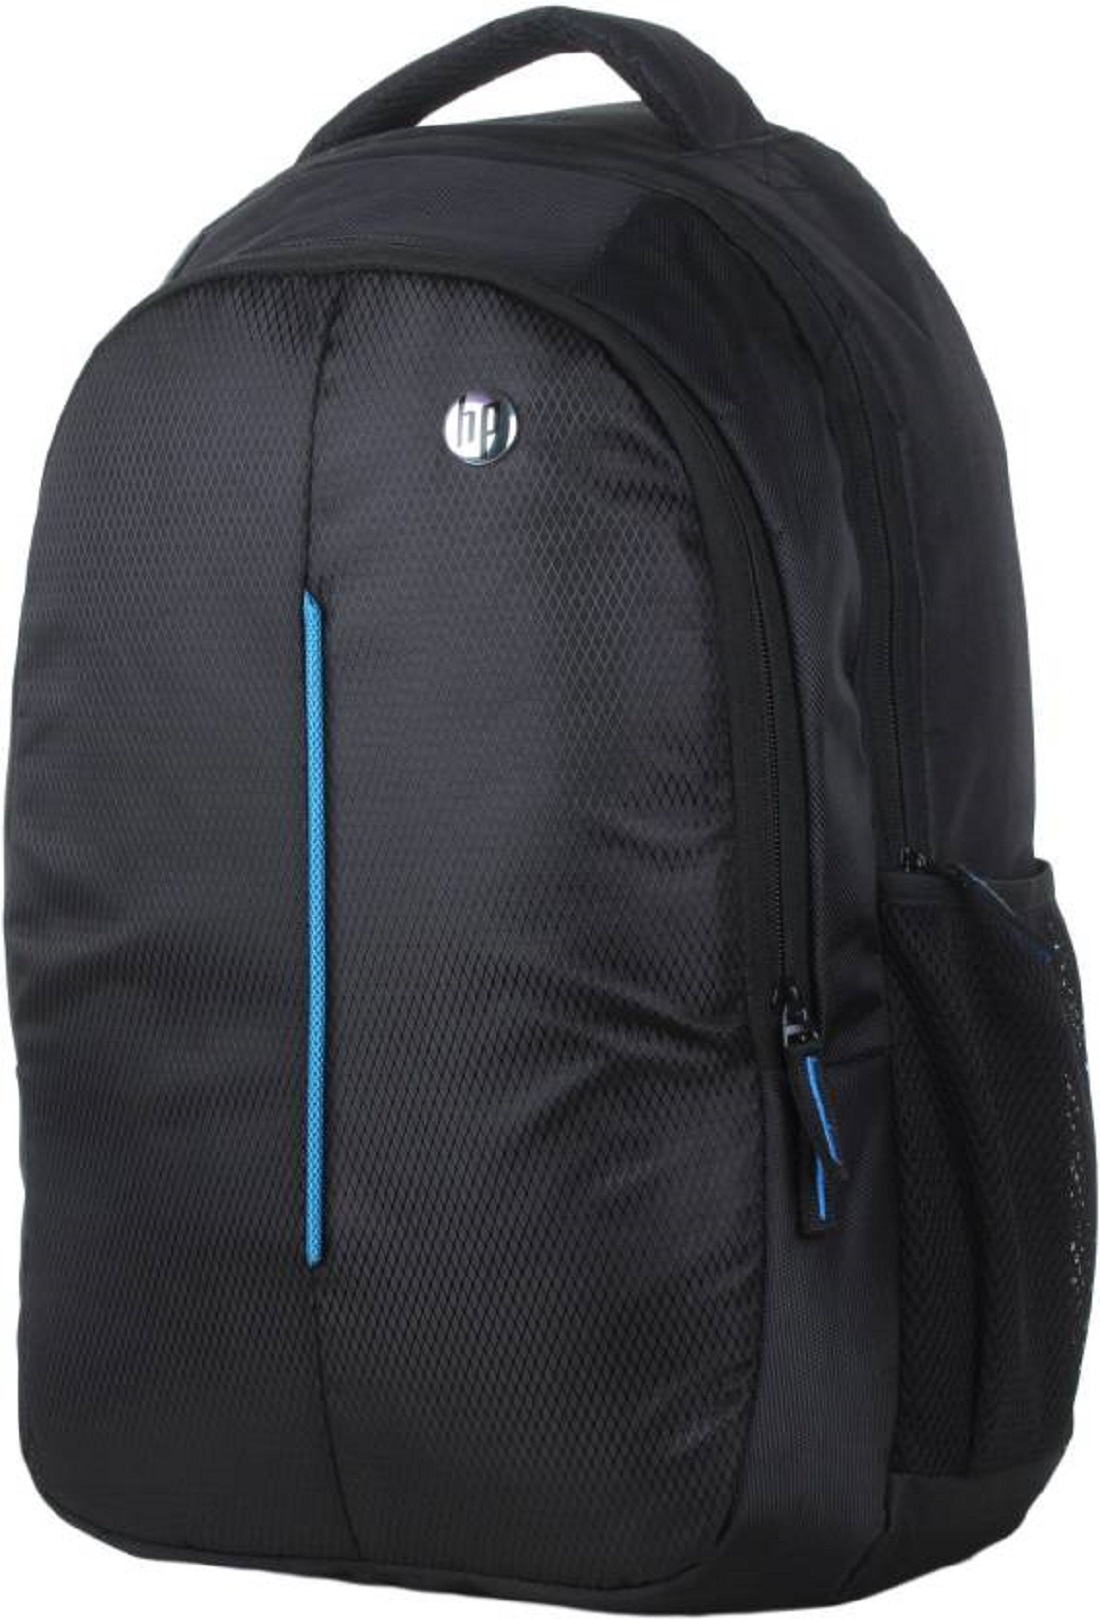 Buy HP 15.6 inch Laptop Backpack (Black) Online @ ₹649 from ShopClues